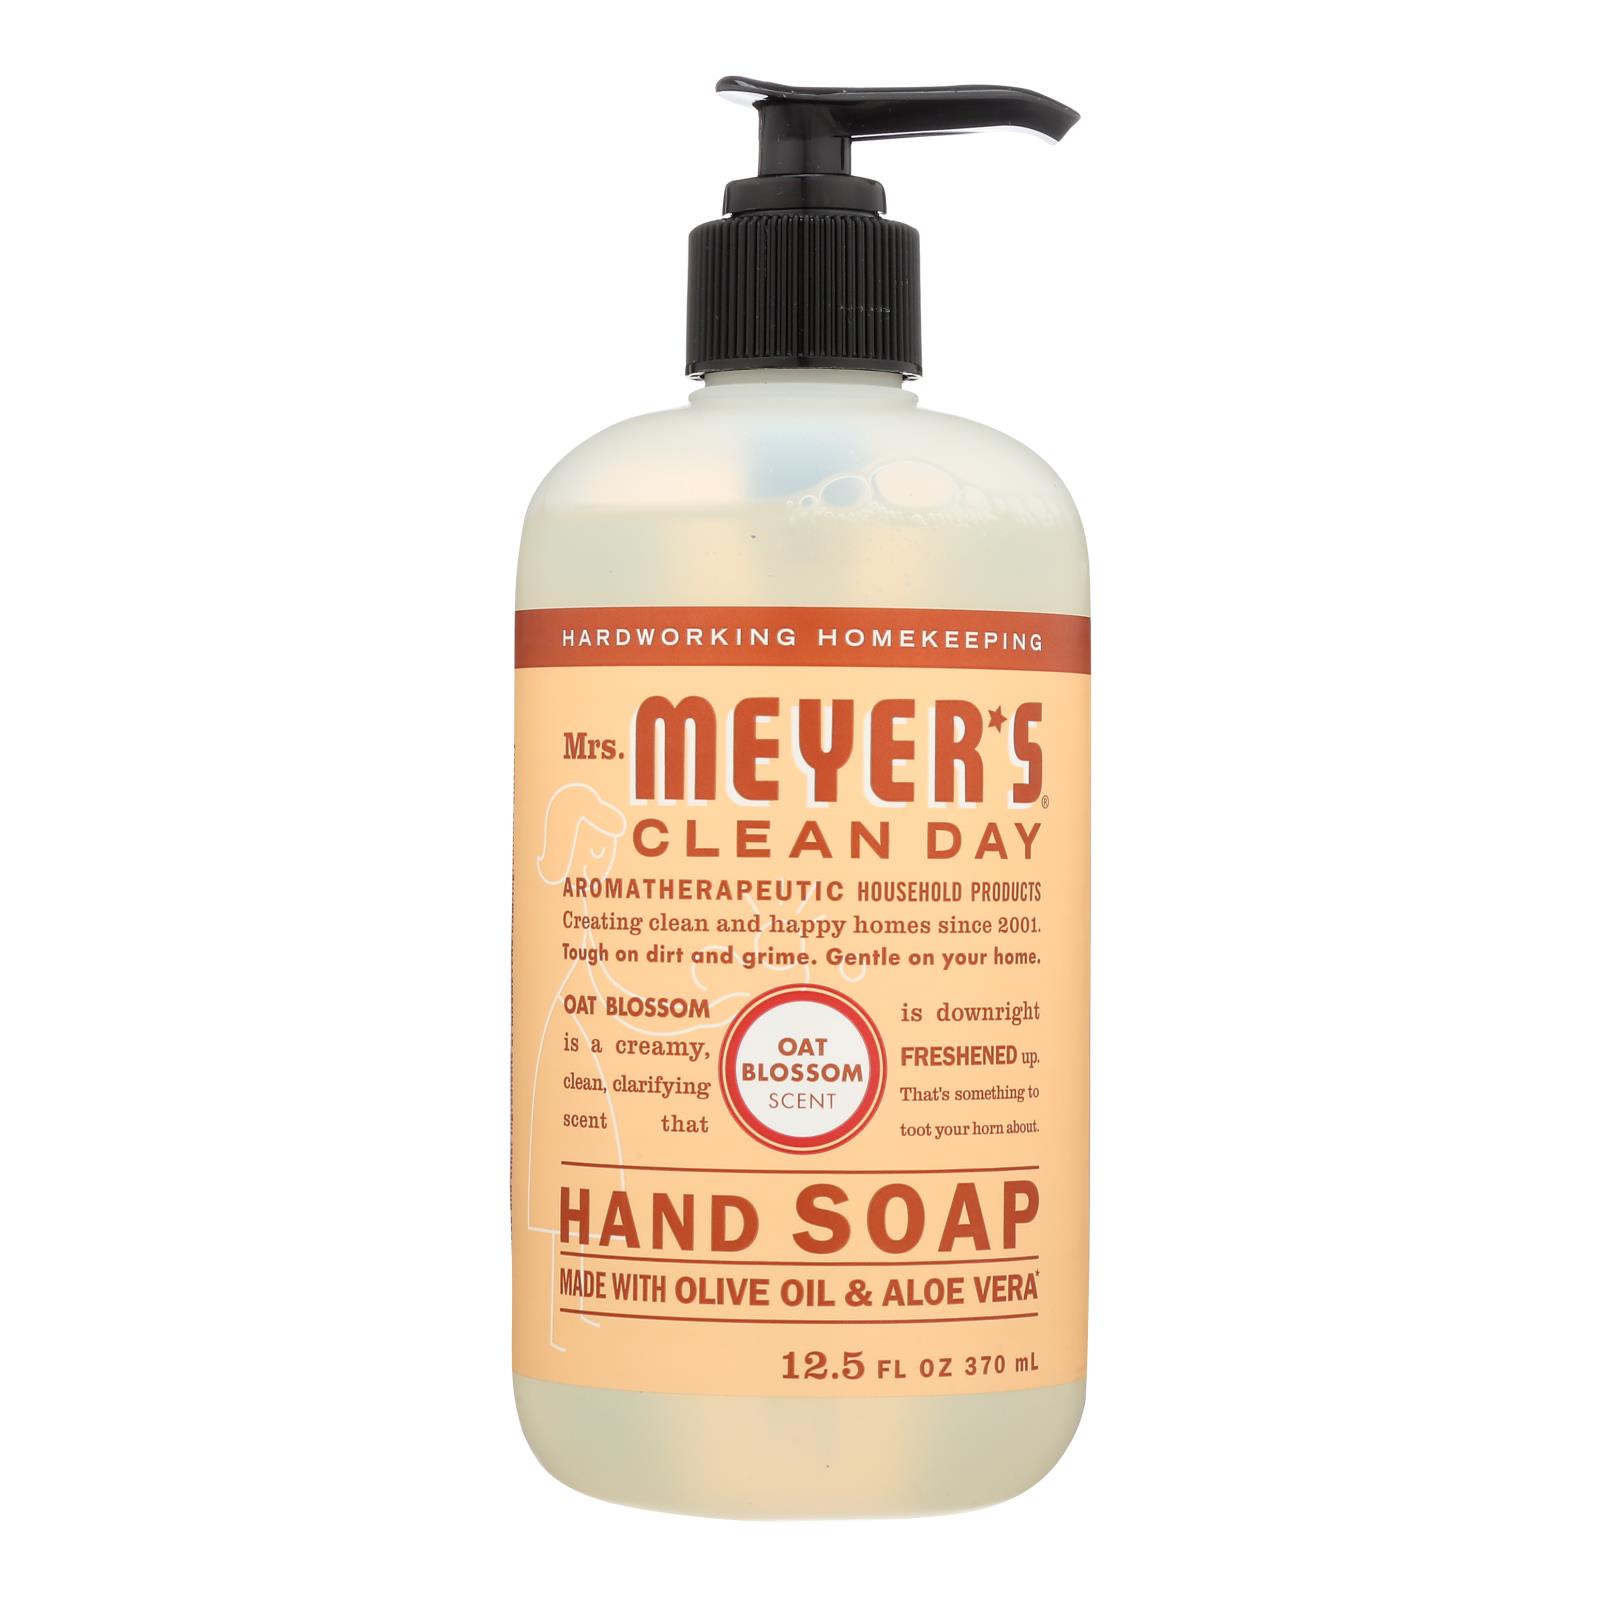 Mrs.meyers Clean Day - Hand Soap Liquid Oat Blossom - Case of 6 - 12.5 FZ